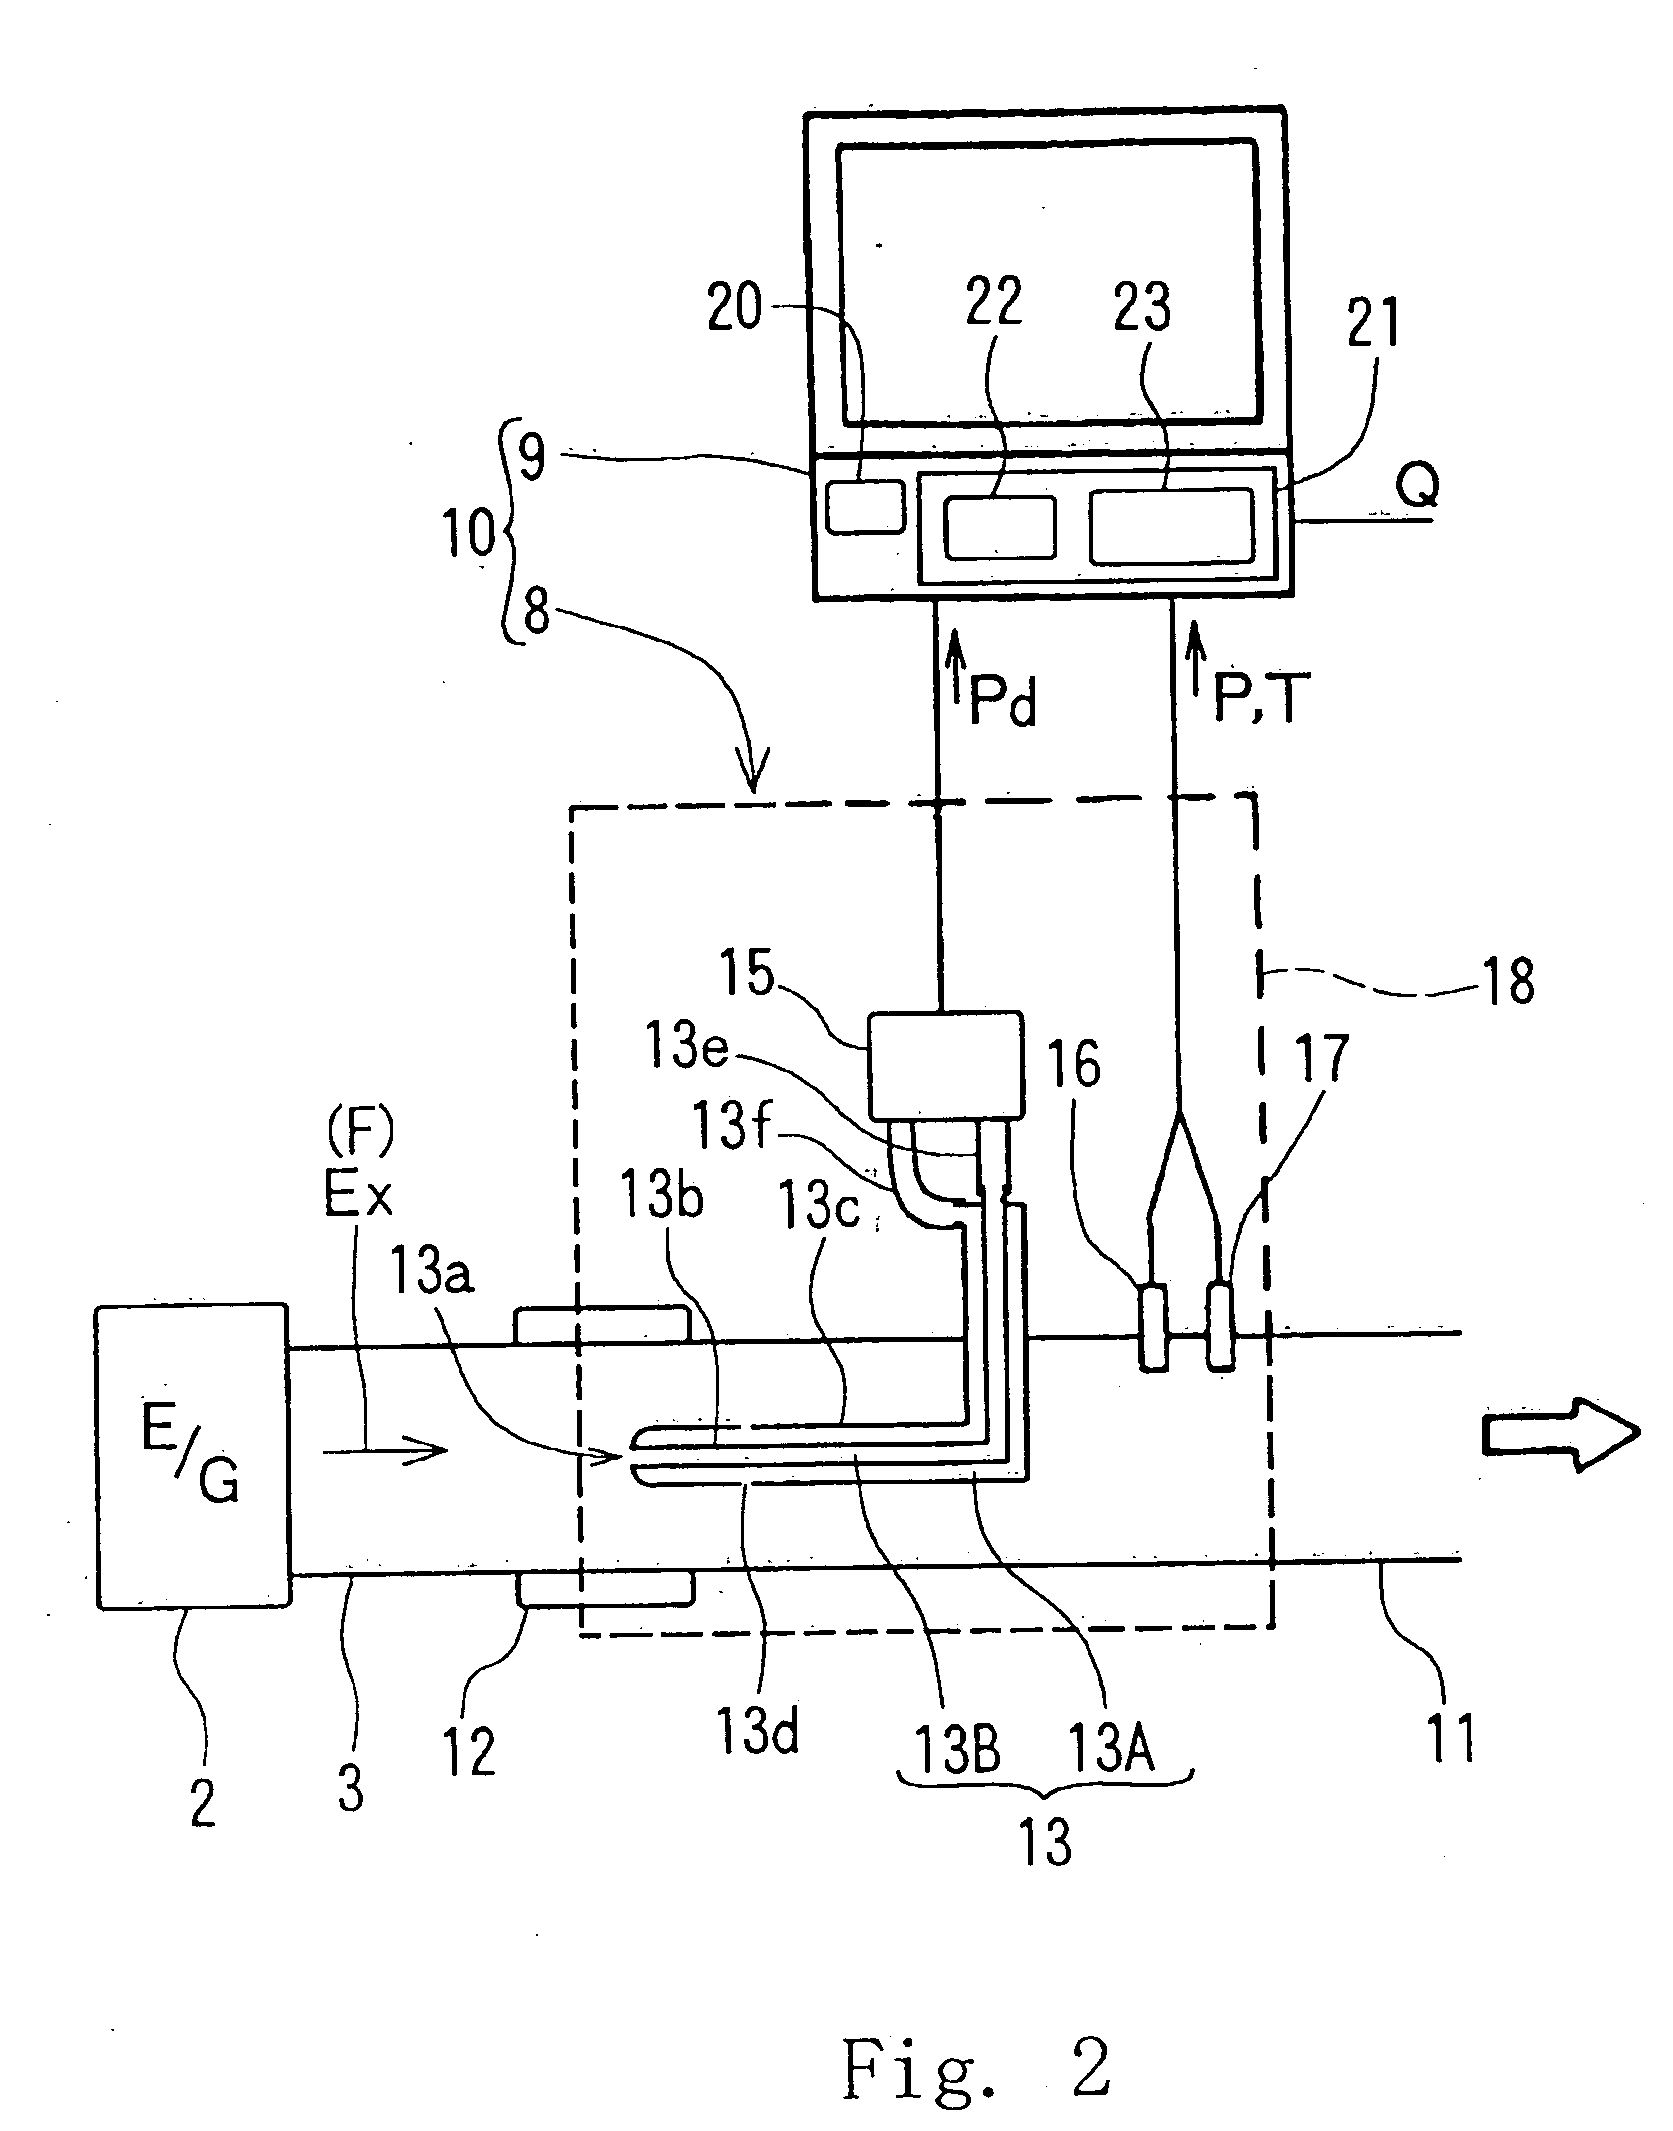 Method and apparatus for measuring exhaust gas flow rate and it's application system for analyzing the exhaust gases from an engine